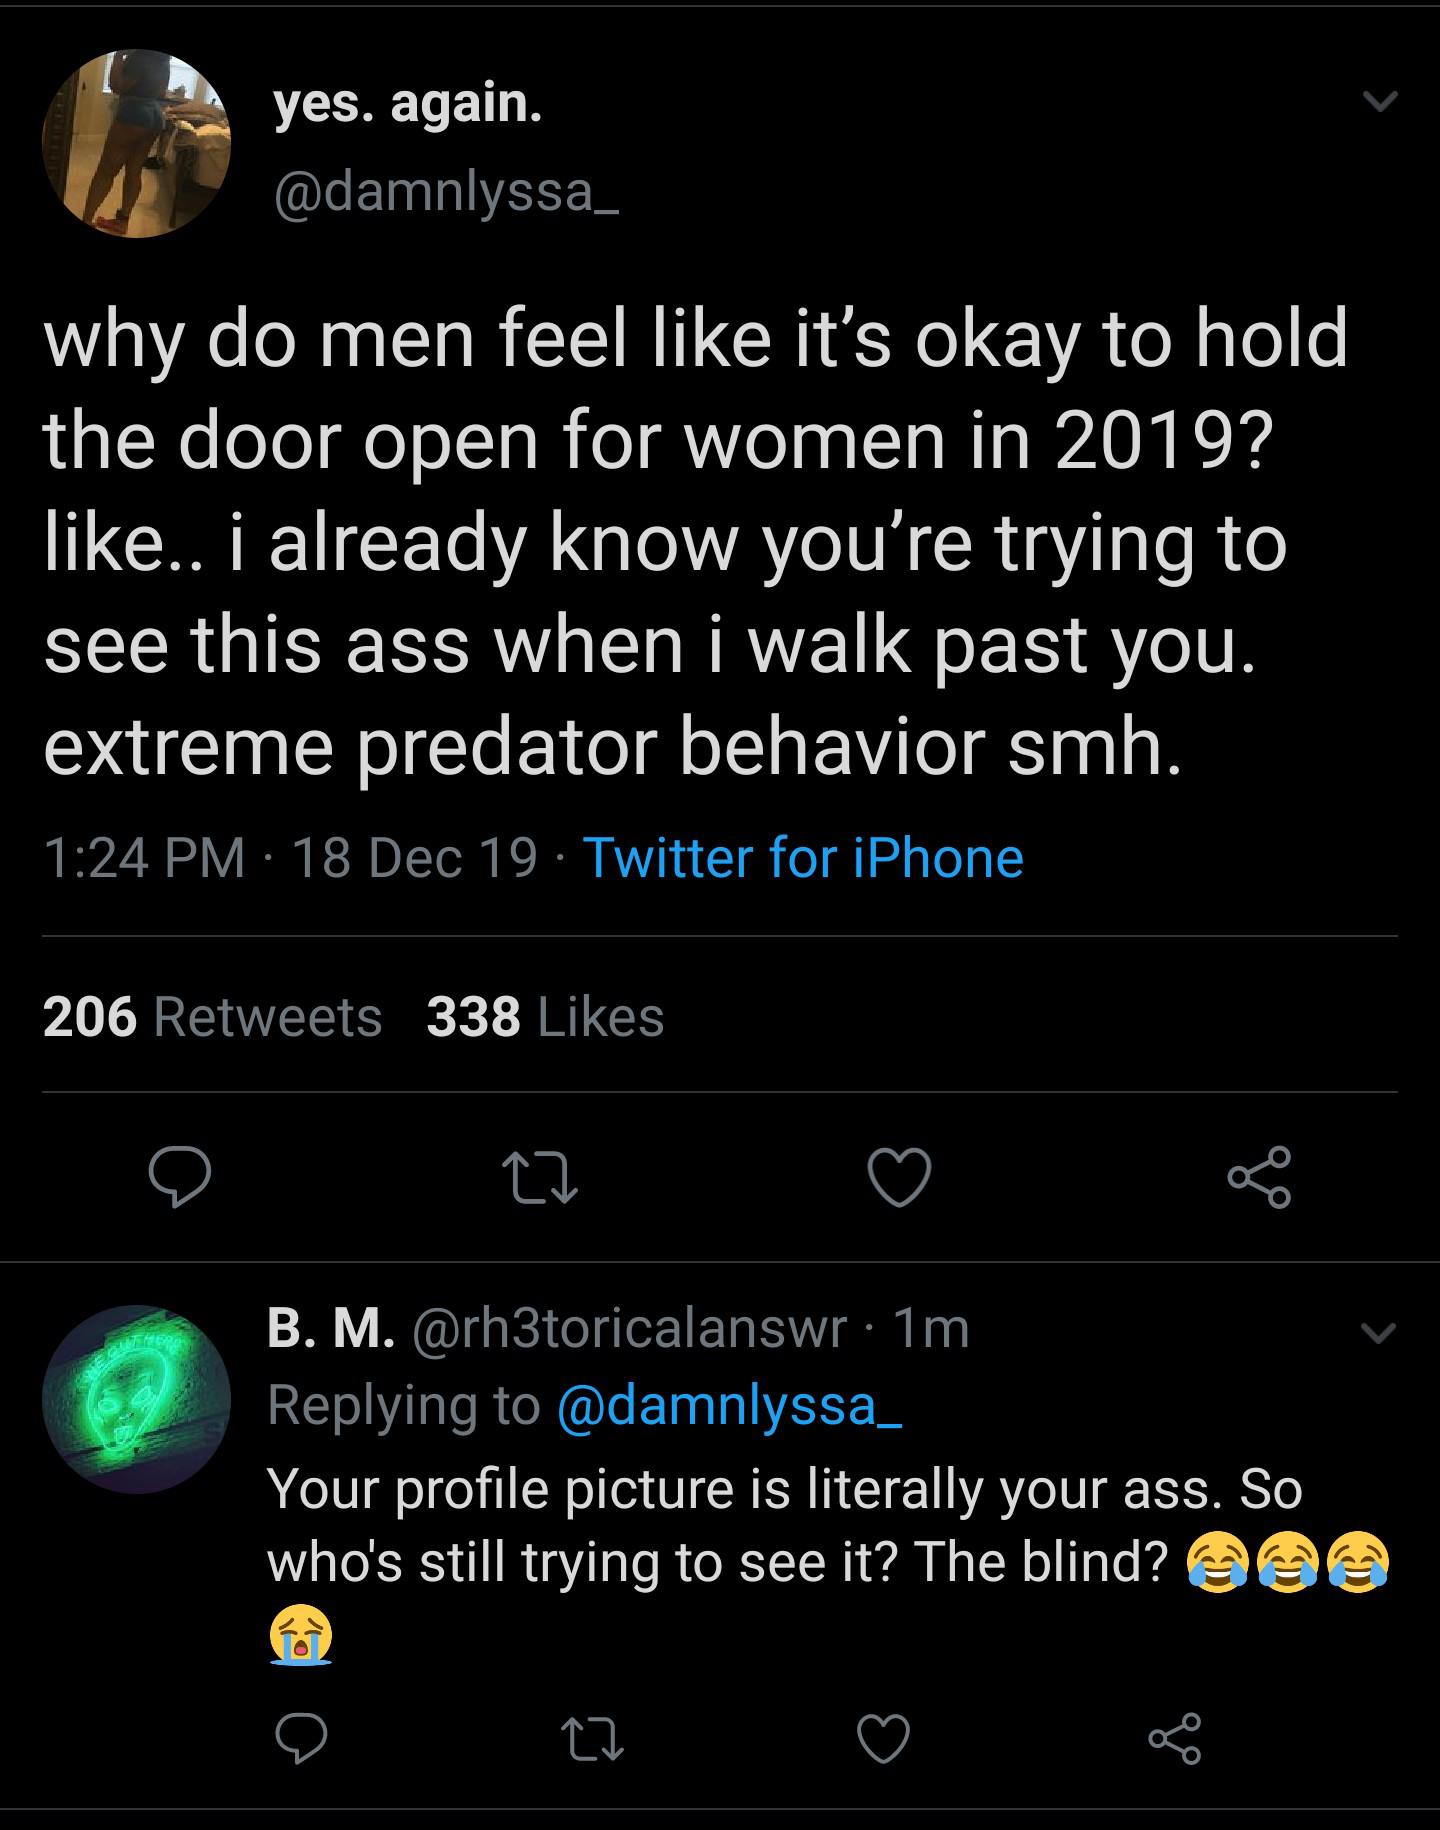 forgiveness quotes - yes. again. why do men feel it's okay to hold the door open for women in 2019? .. I already know you're trying to see this ass when i walk past you. extreme predator behavior smh. 18 Dec 19. Twitter for iPhone 206 338 B. M. 1m Your pr